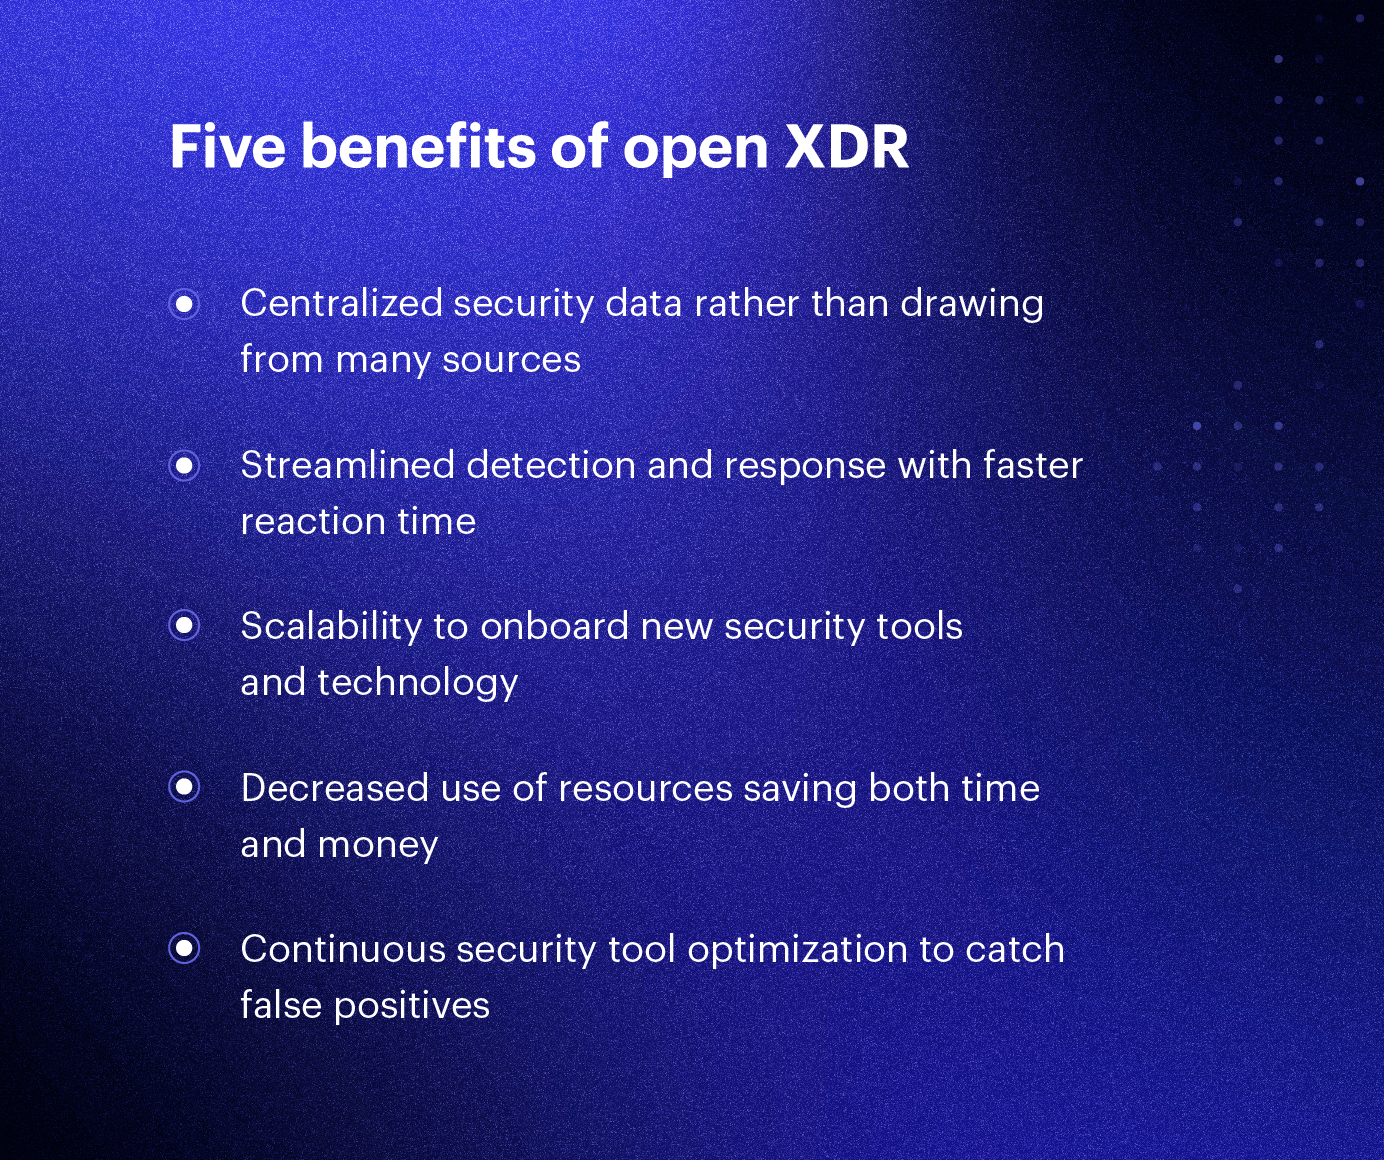 benefits-of-open-xdr@2x